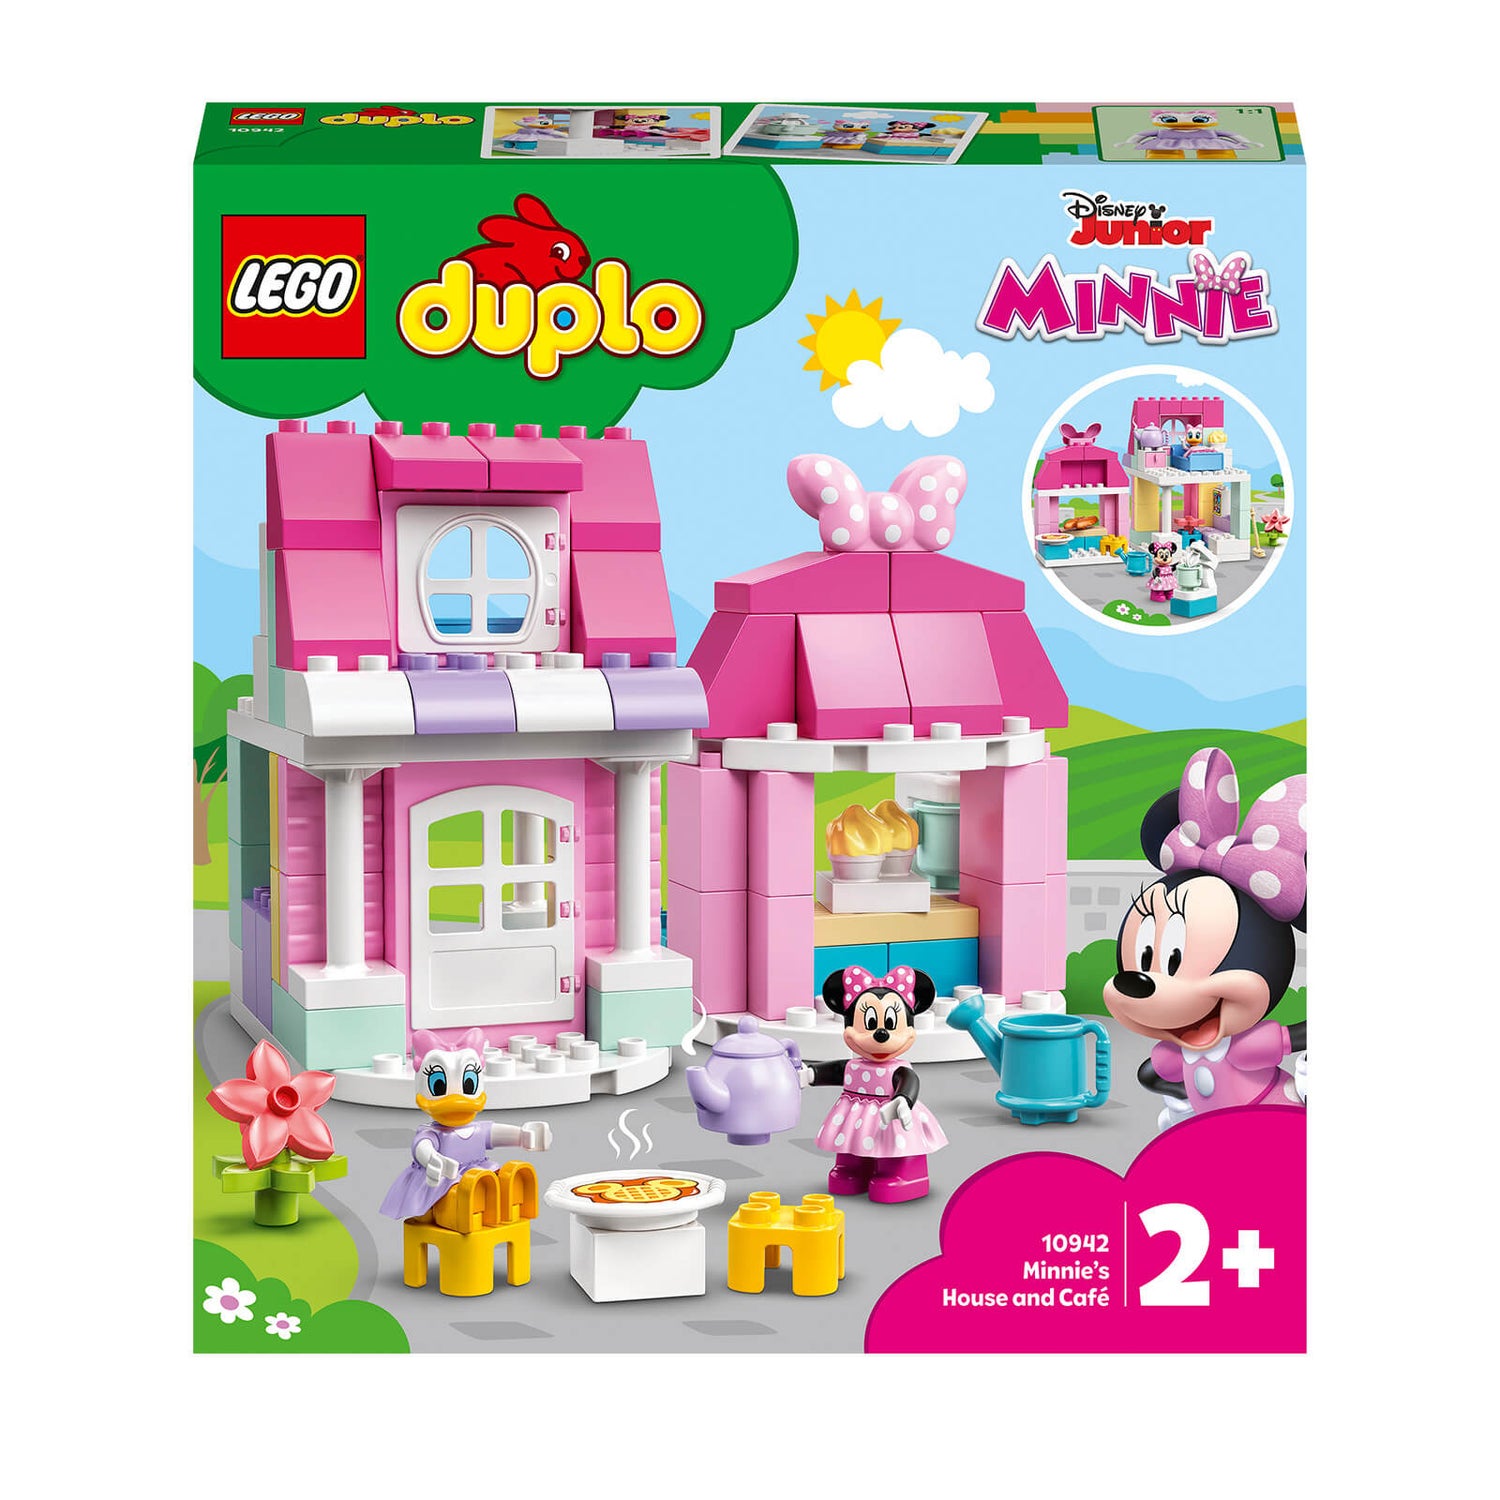 LEGO DUPLO Minnie's House and Caf Toy for Toddlers (10942)